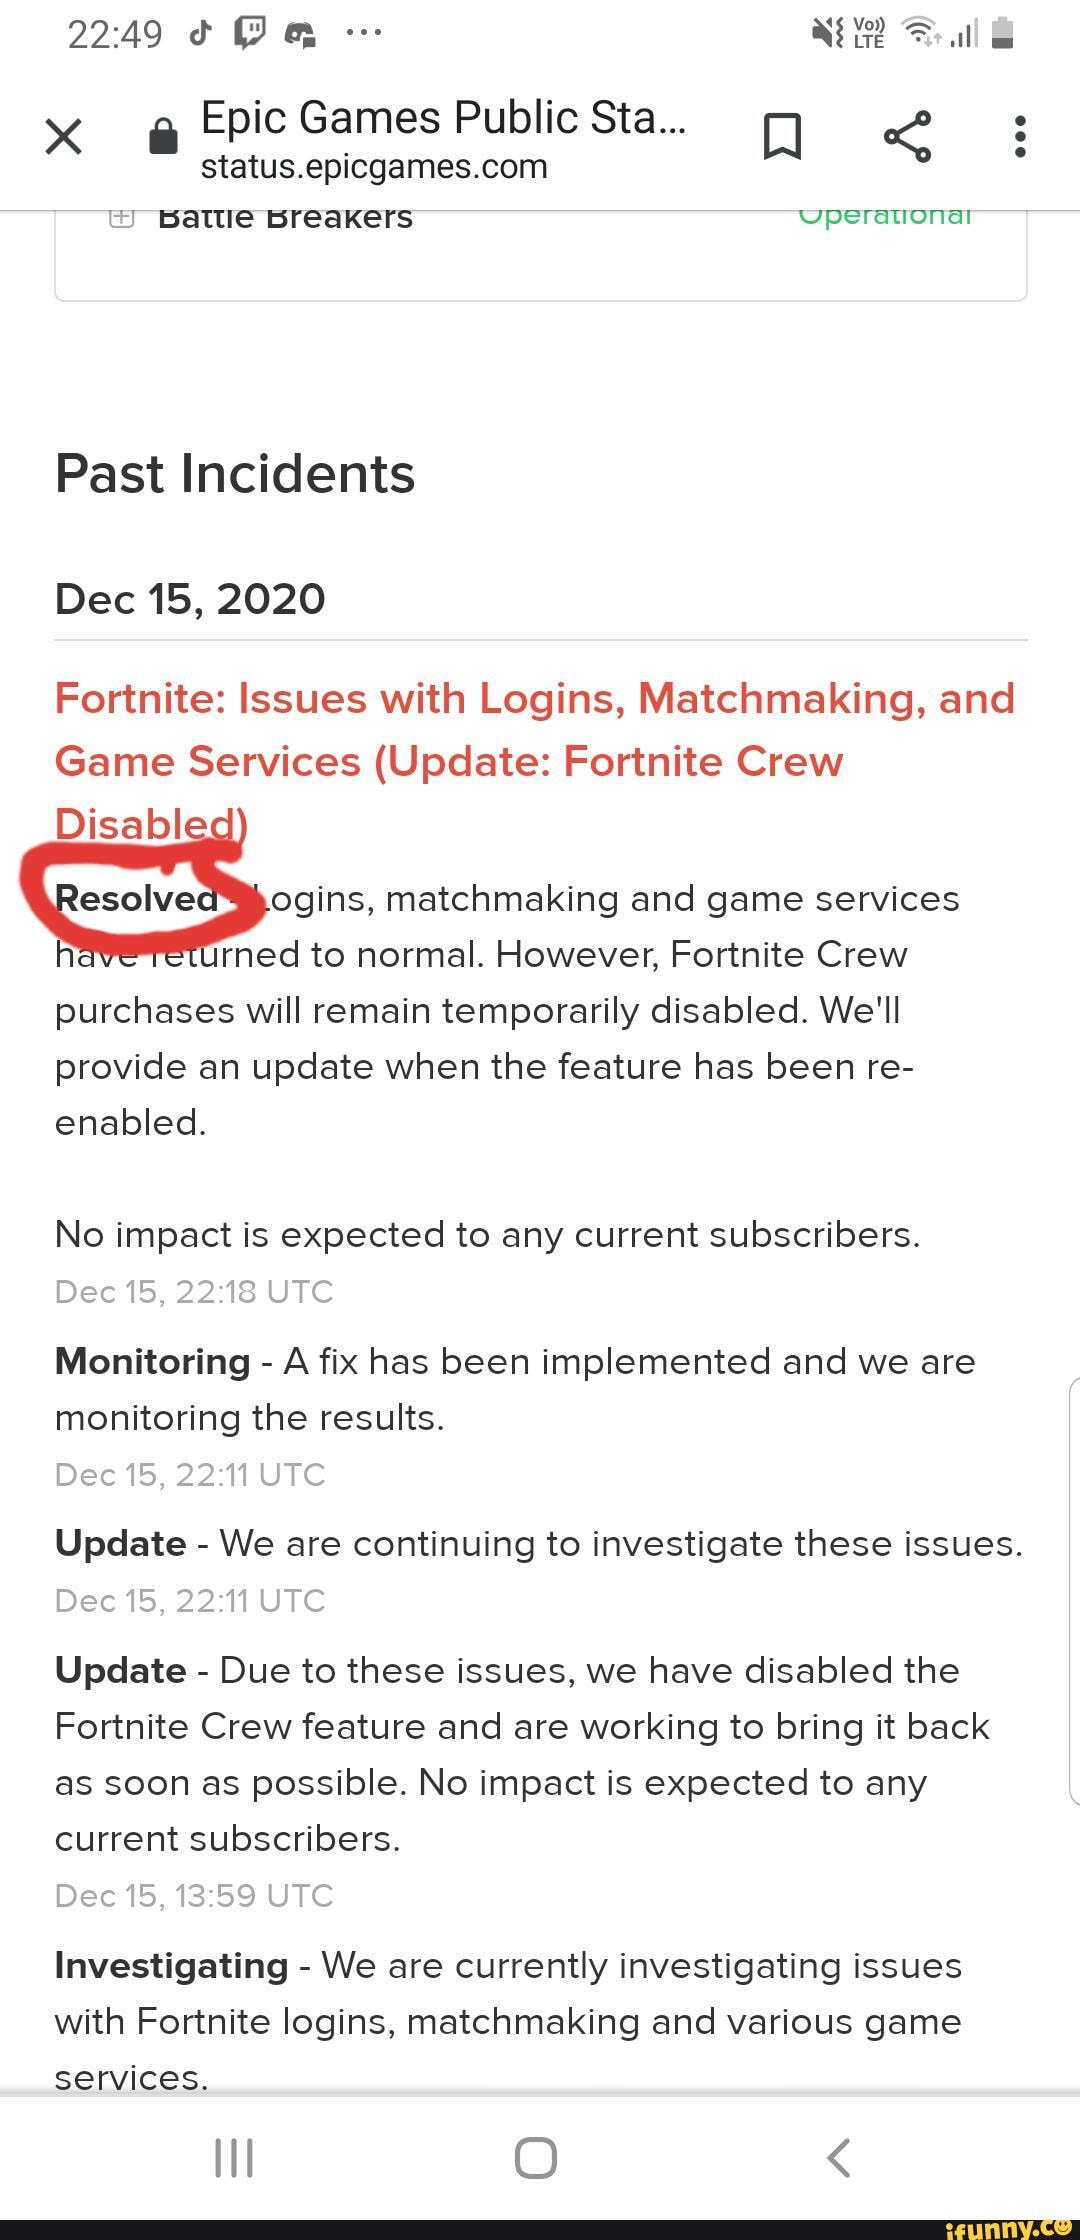 2249 Ga Epic Games Public Sta Pattie Breakers Past Incidents Dec 15 Fortnite Issues With